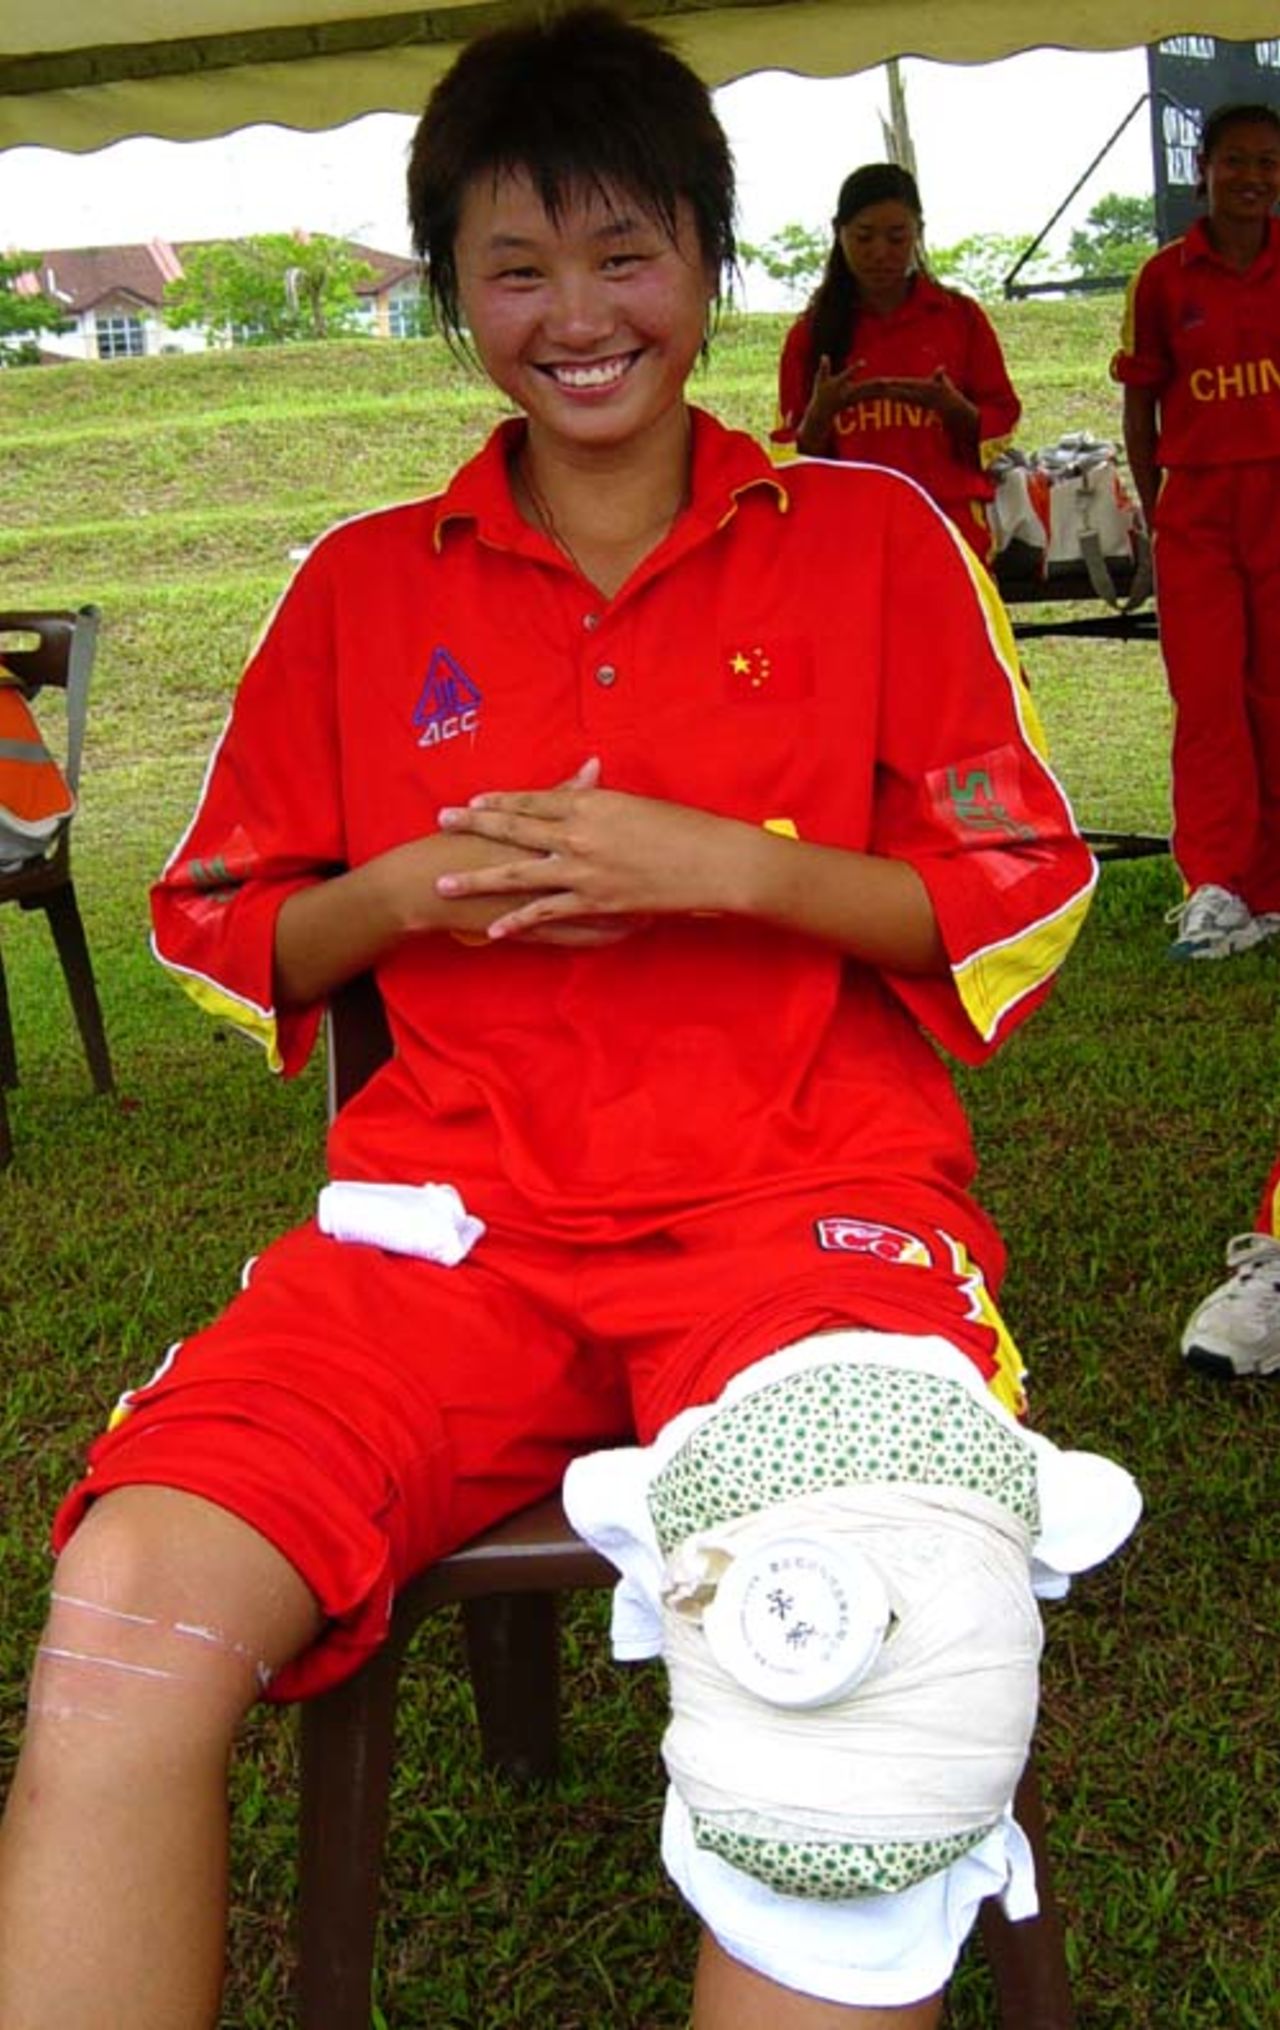 Playing with a strained ligament, Hu Ting Ting added 31 runs with Duan Qiong to take China to a seven-wicket victory over UAE, China v UAE, ACC women's tournament, Johor, July 14, 2007